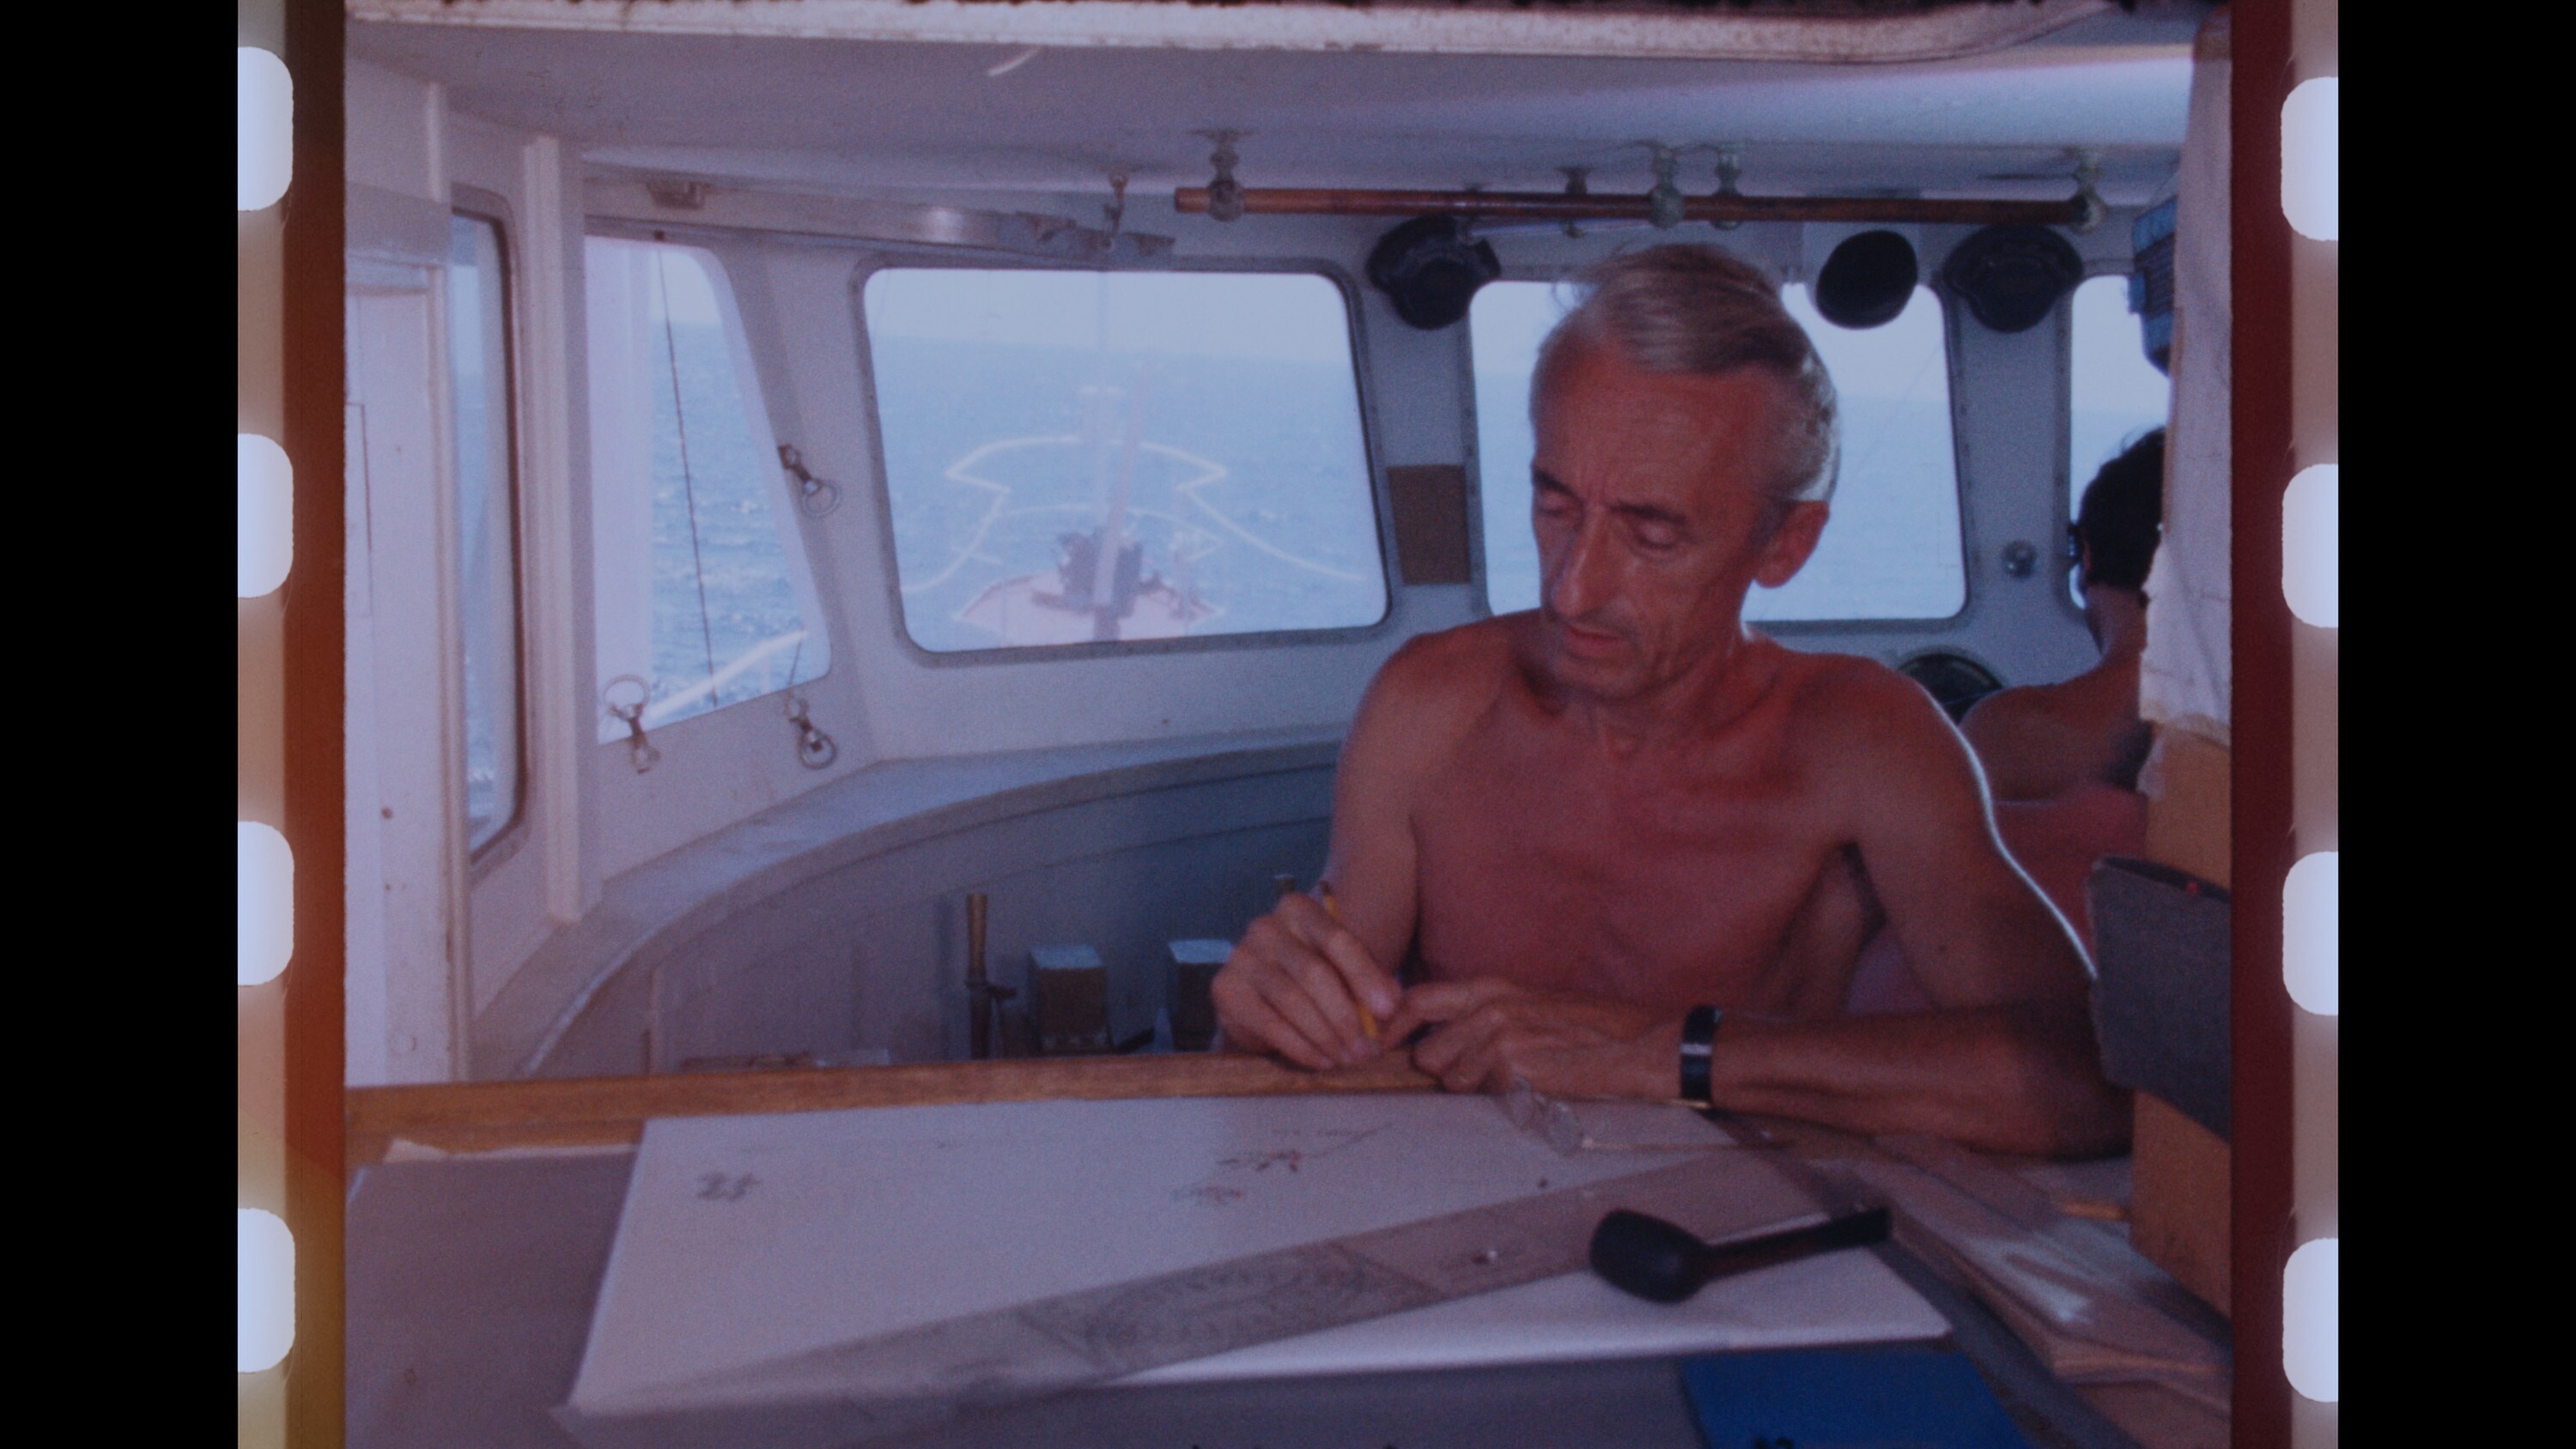 Jacques Cousteau examines navigational charts aboard his ship, Calypso. (Credit: The Cousteau Society)